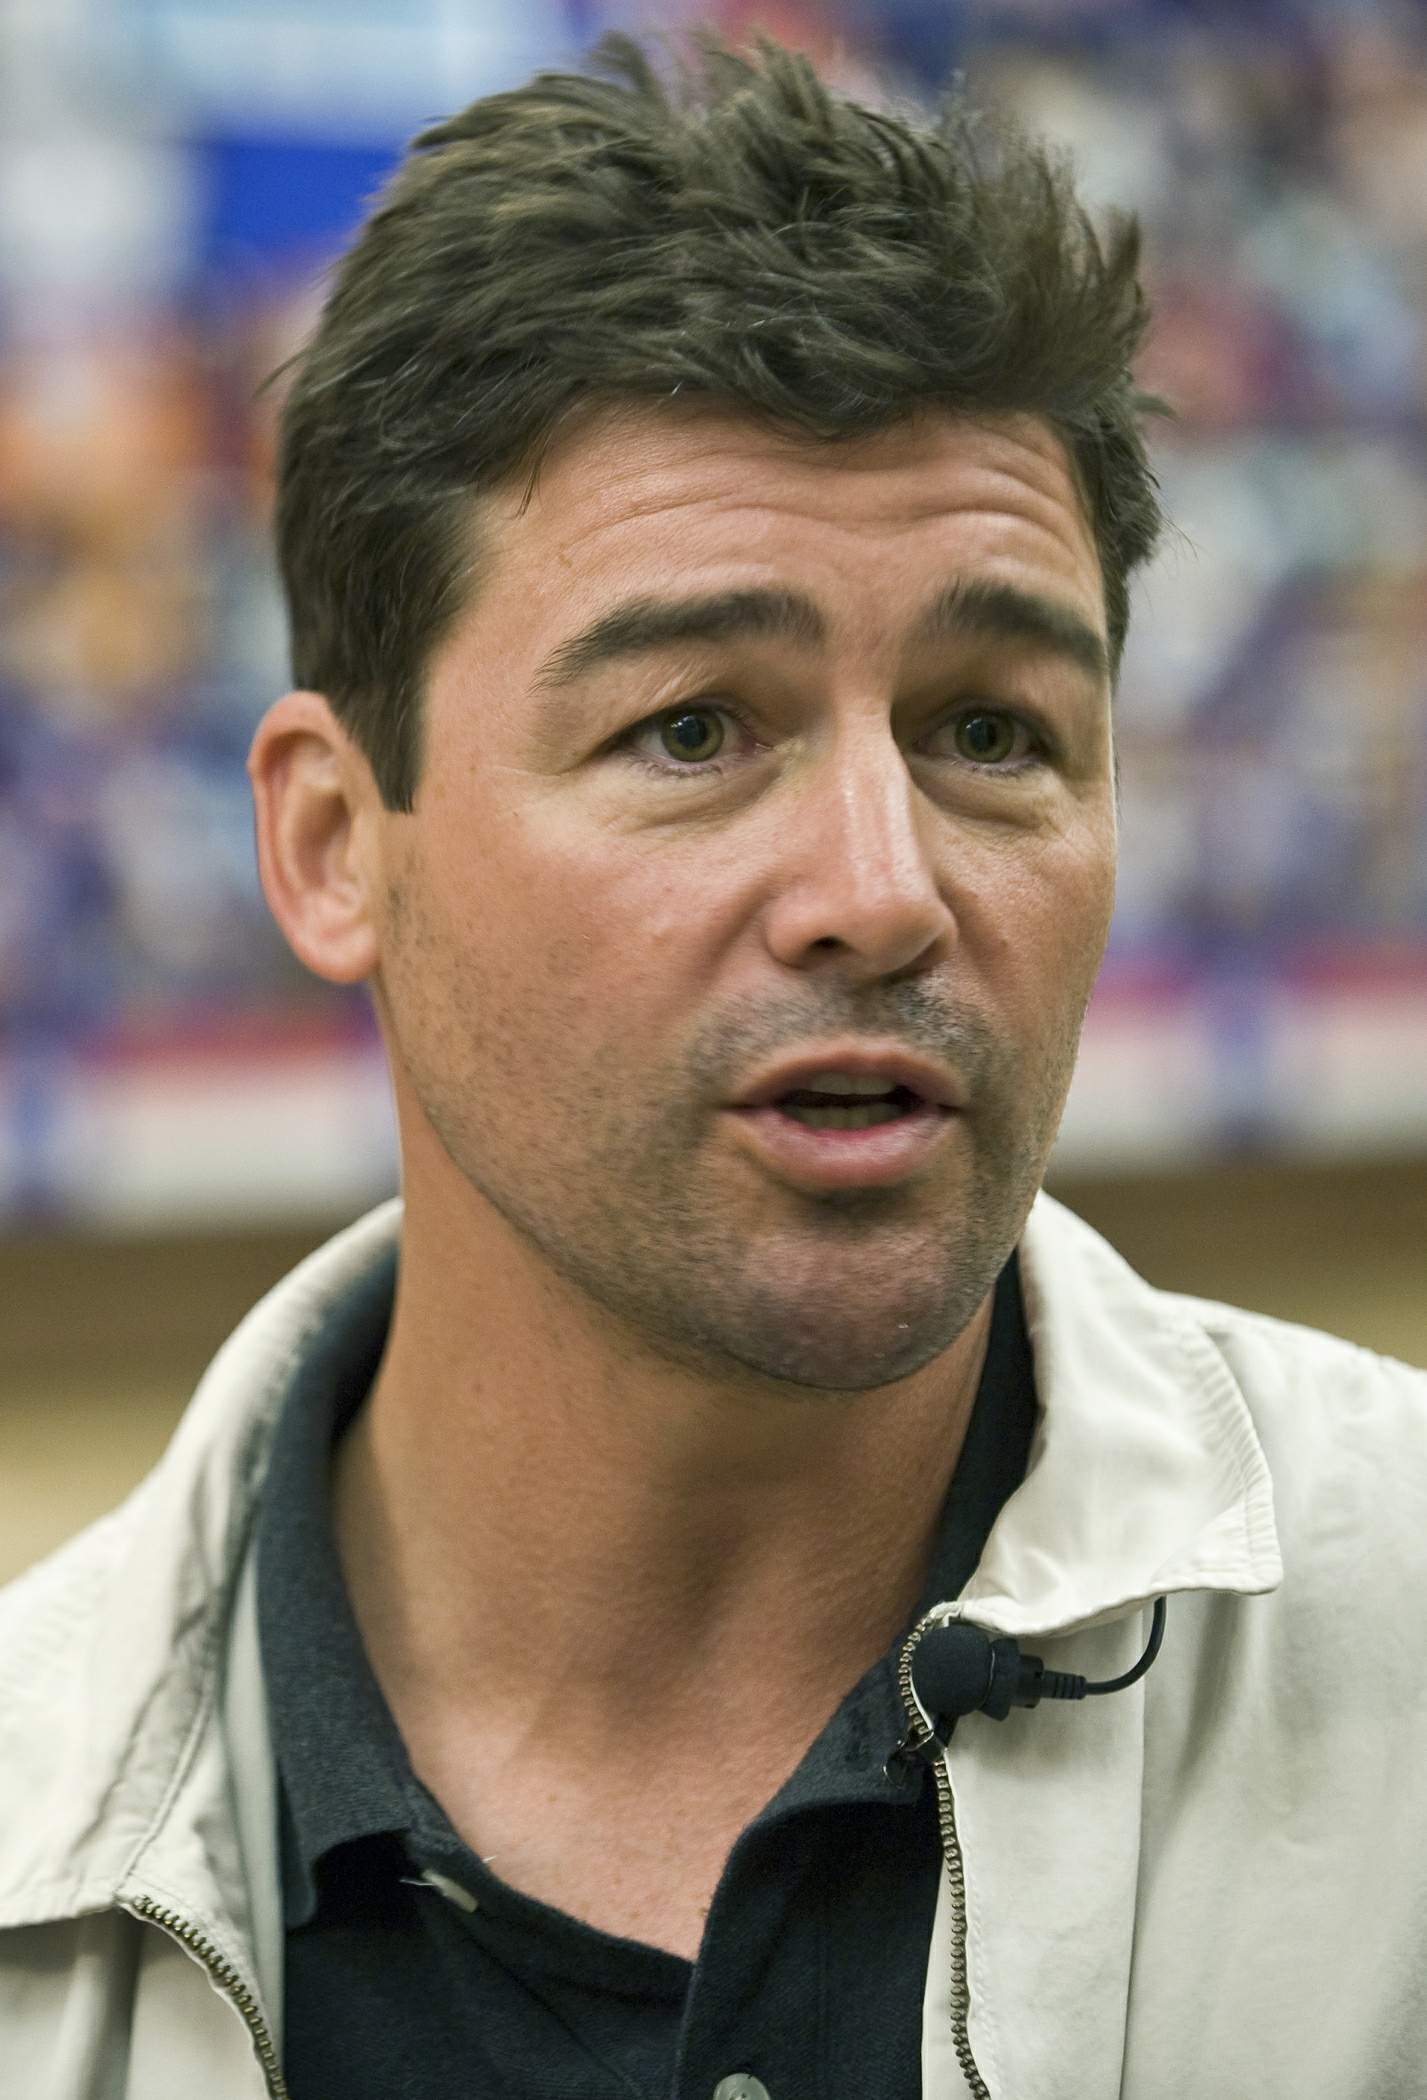 Kyle Chandler's quote #3